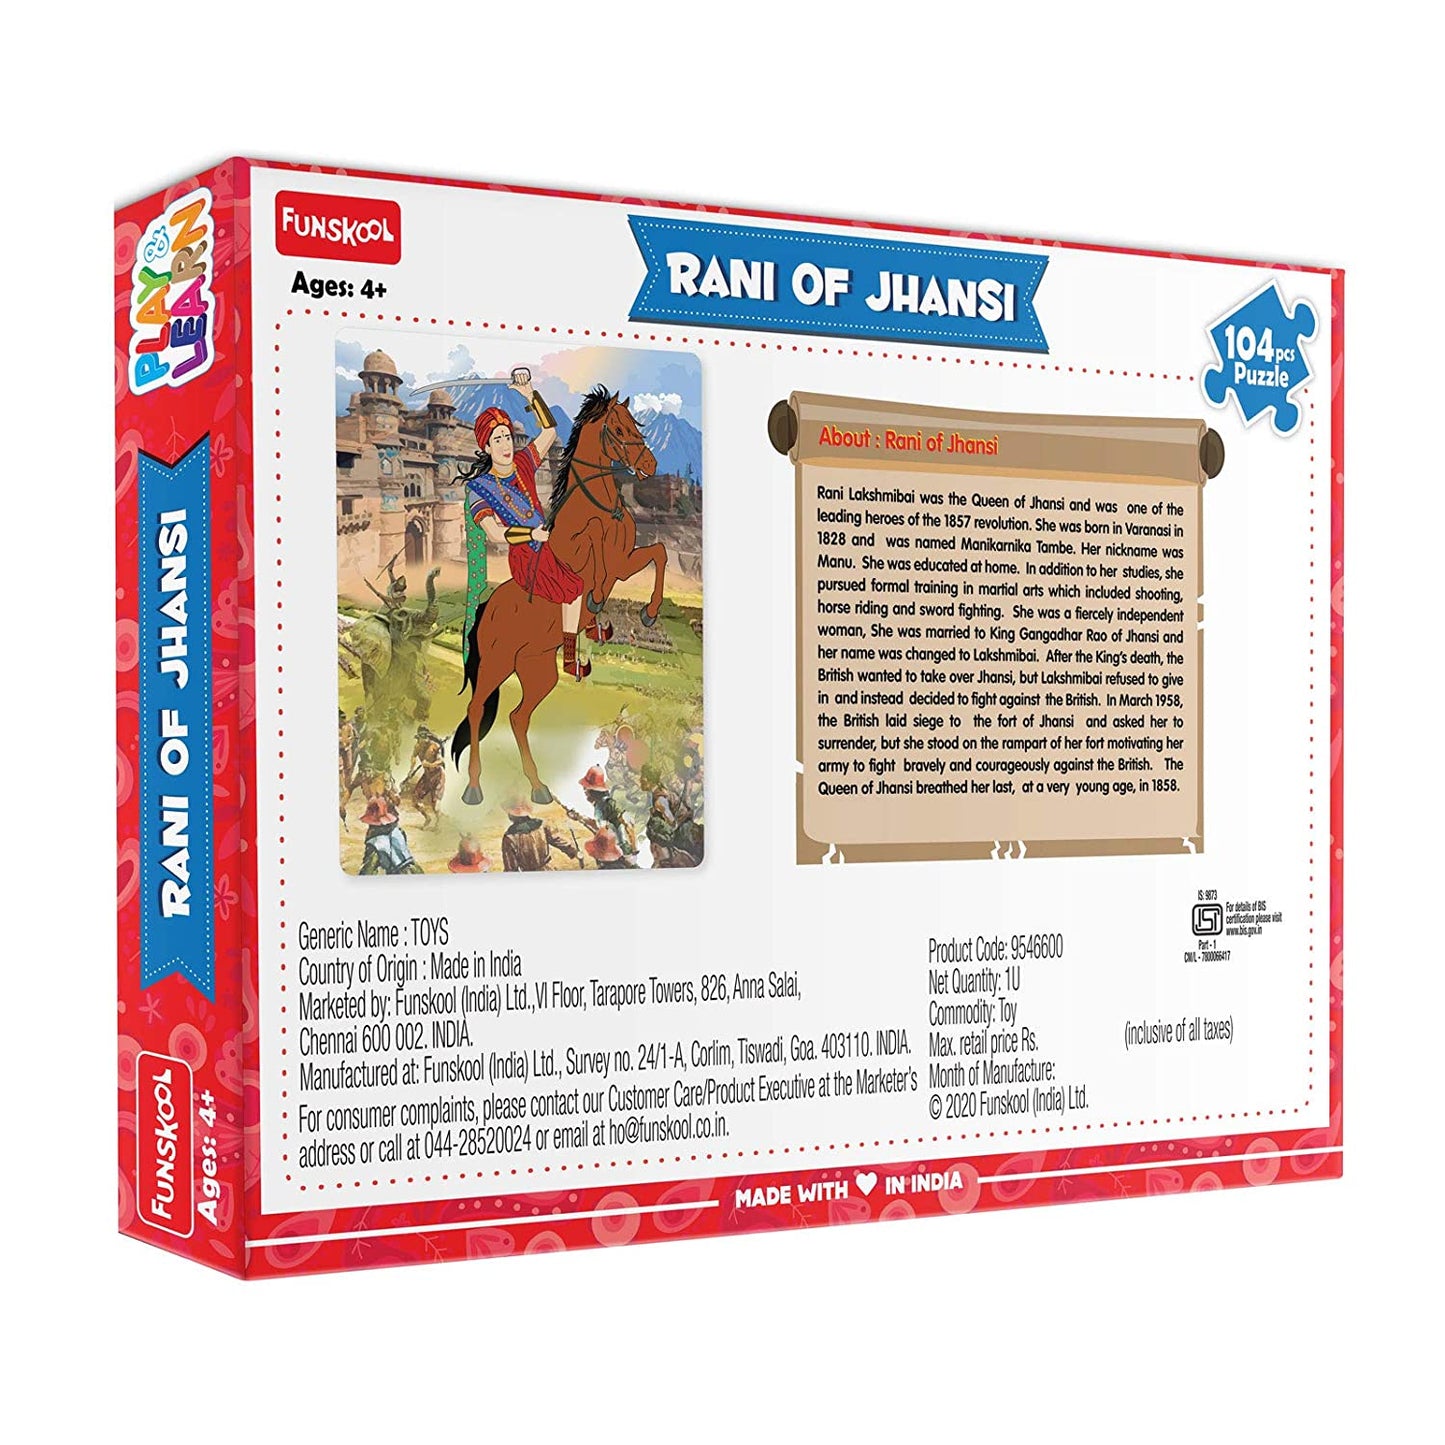 Funskool Rani of Jhansi Historic Characters 104 Pcs Puzzle Educational Gift for 5+ Year Kids